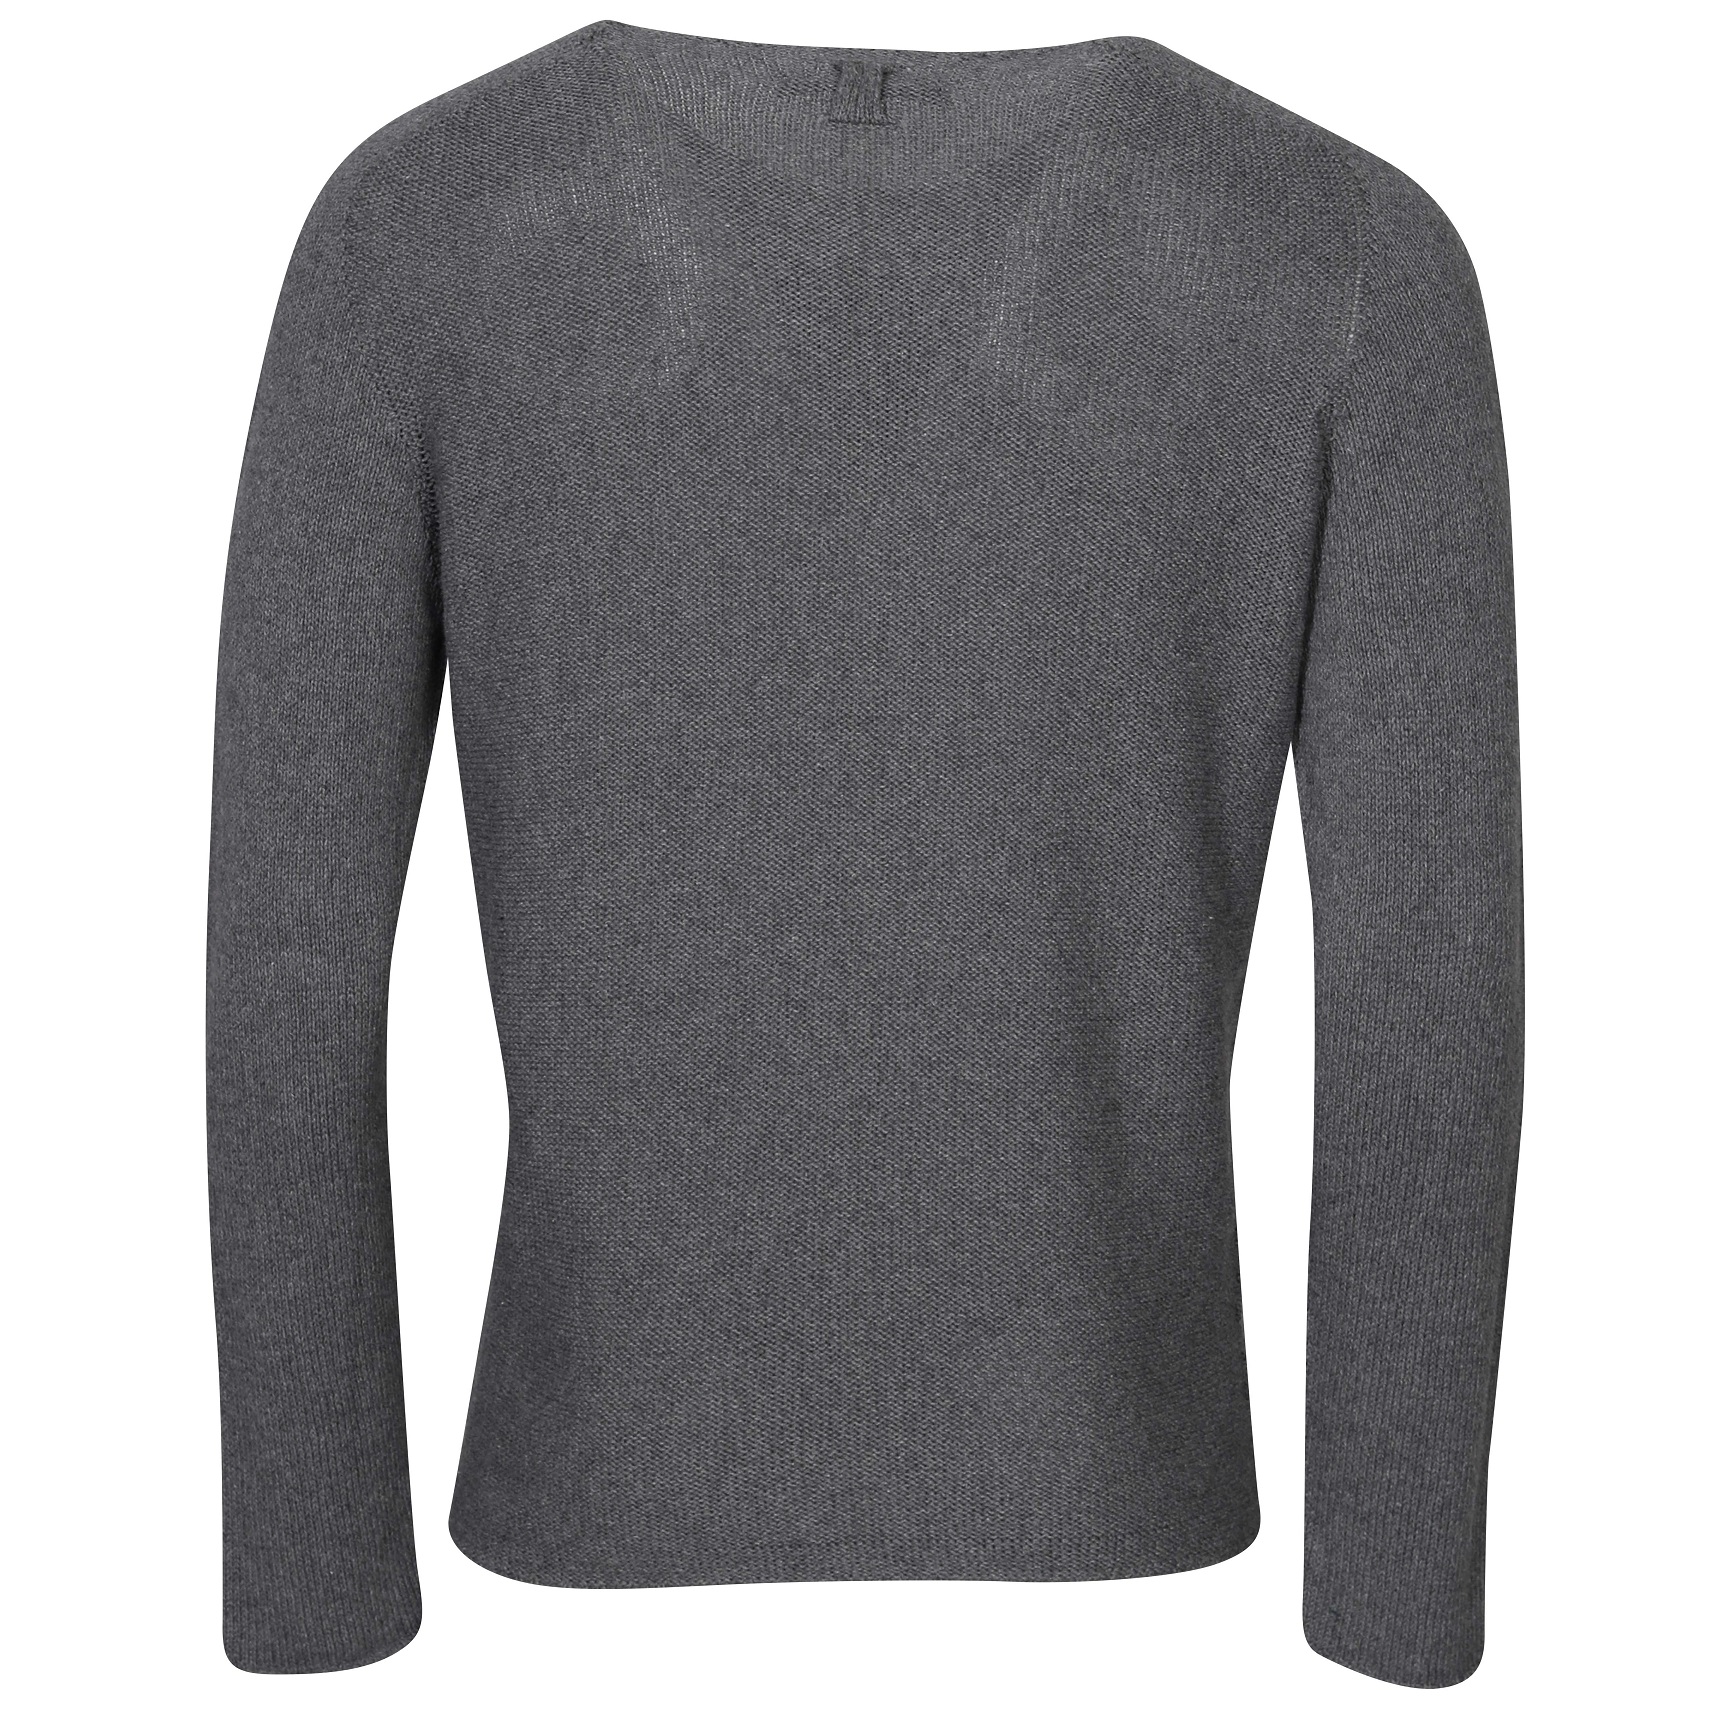 HANNES ROETHER Knit Sweater in Grey L